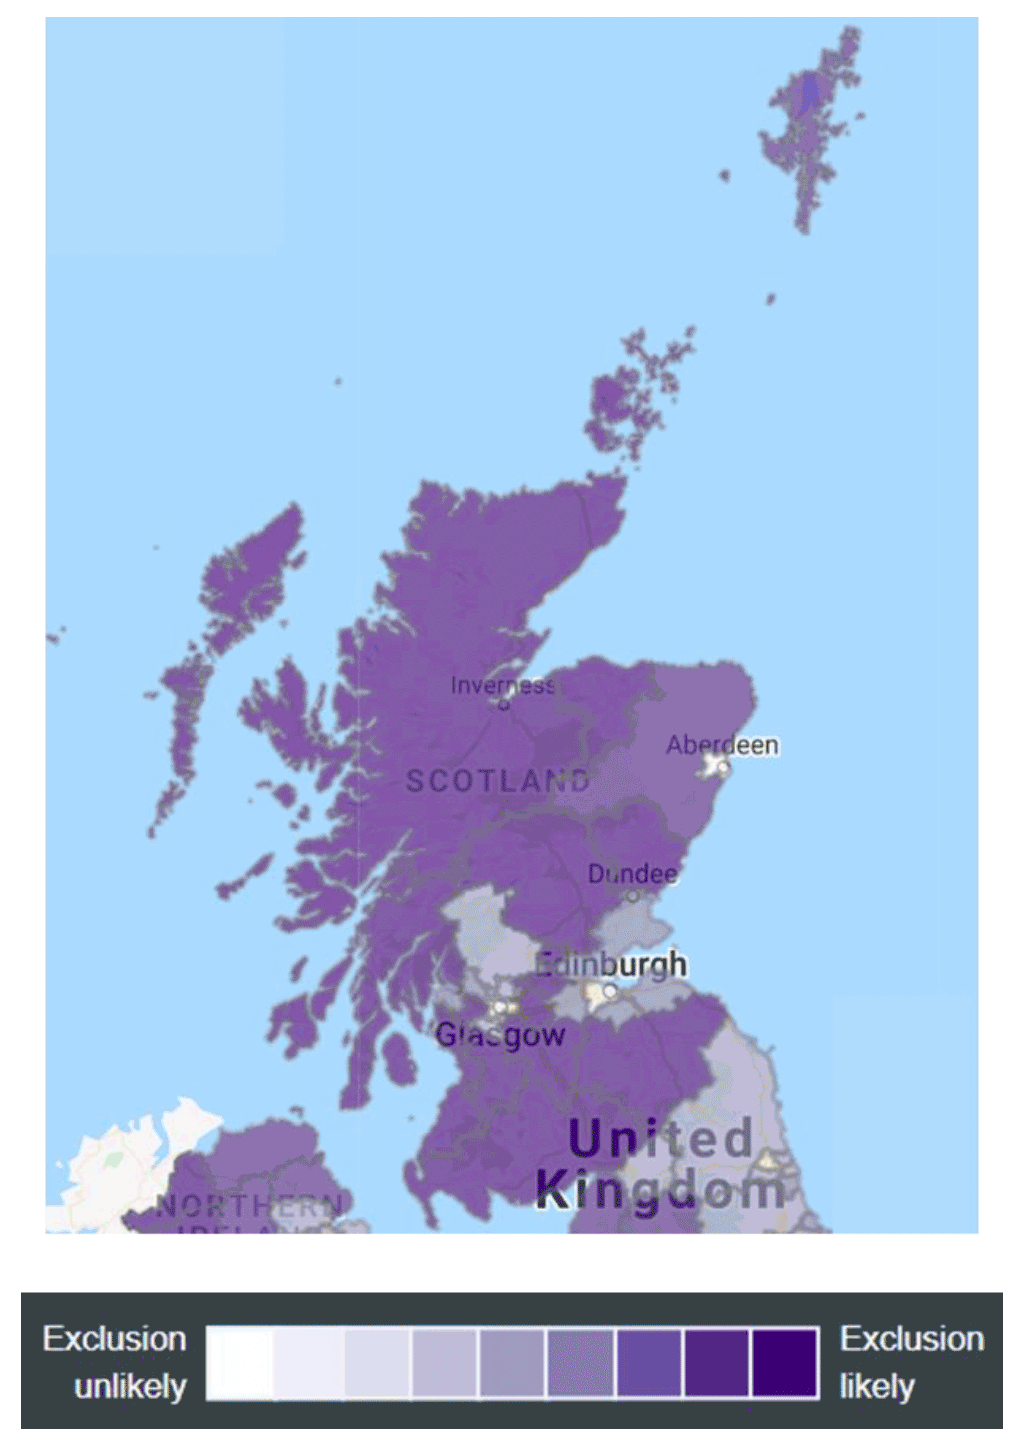 A map is shown of Scotland named the 'Get Digital Heatmap' produced in 2017 by the Tech Partnership working with Lloyds banking group, the London School of Economics and Political Science (LSE) and the Local Government Association. It shows the likelihood of digital exclusion in Scotland by shading, with the lightest shade being unlikely to experience digital exclusion and the darkest shade being the most likely to experience digital exclusion. Of the thirty-two local authorities in Scotland, nineteen have a high likelihood of digital exclusion. There are only three local authorities with low likelihood of digital exclusion in Scotland: Aberdeen, Edinburgh and Glasgow.